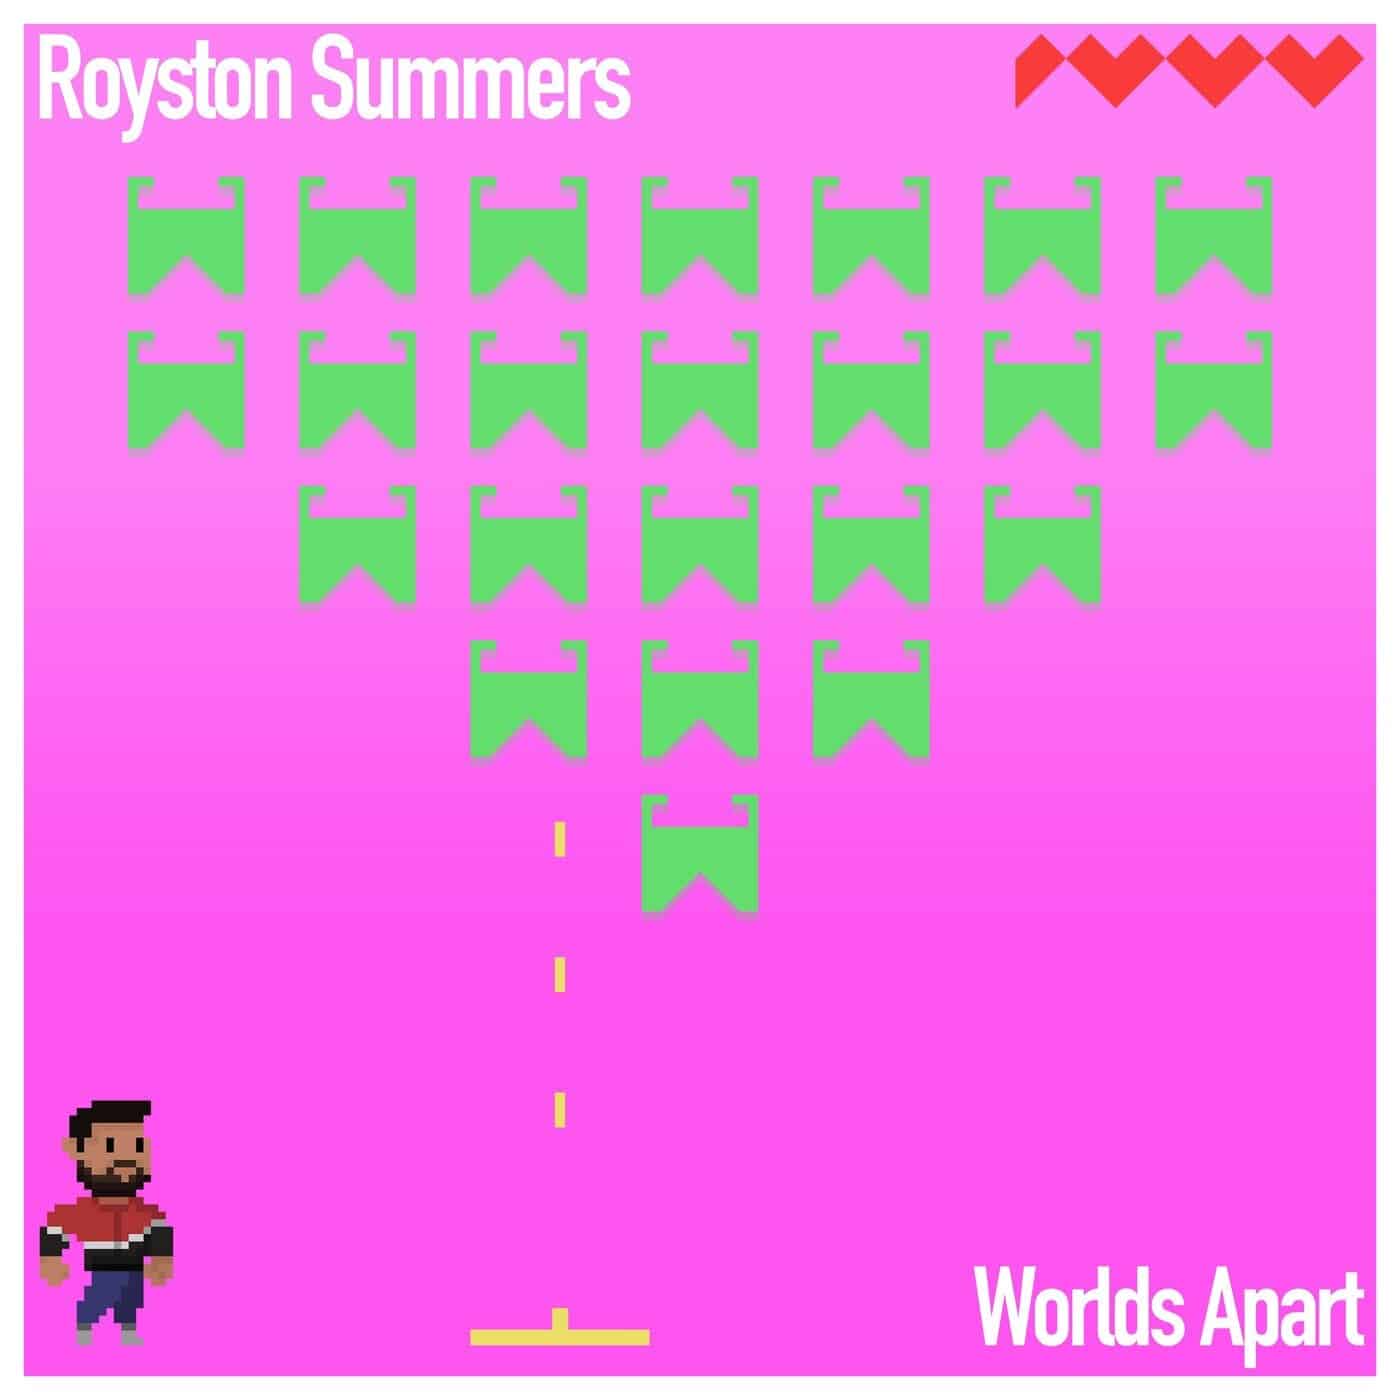 image cover: Royston Summers - Worlds Apart / ROY006